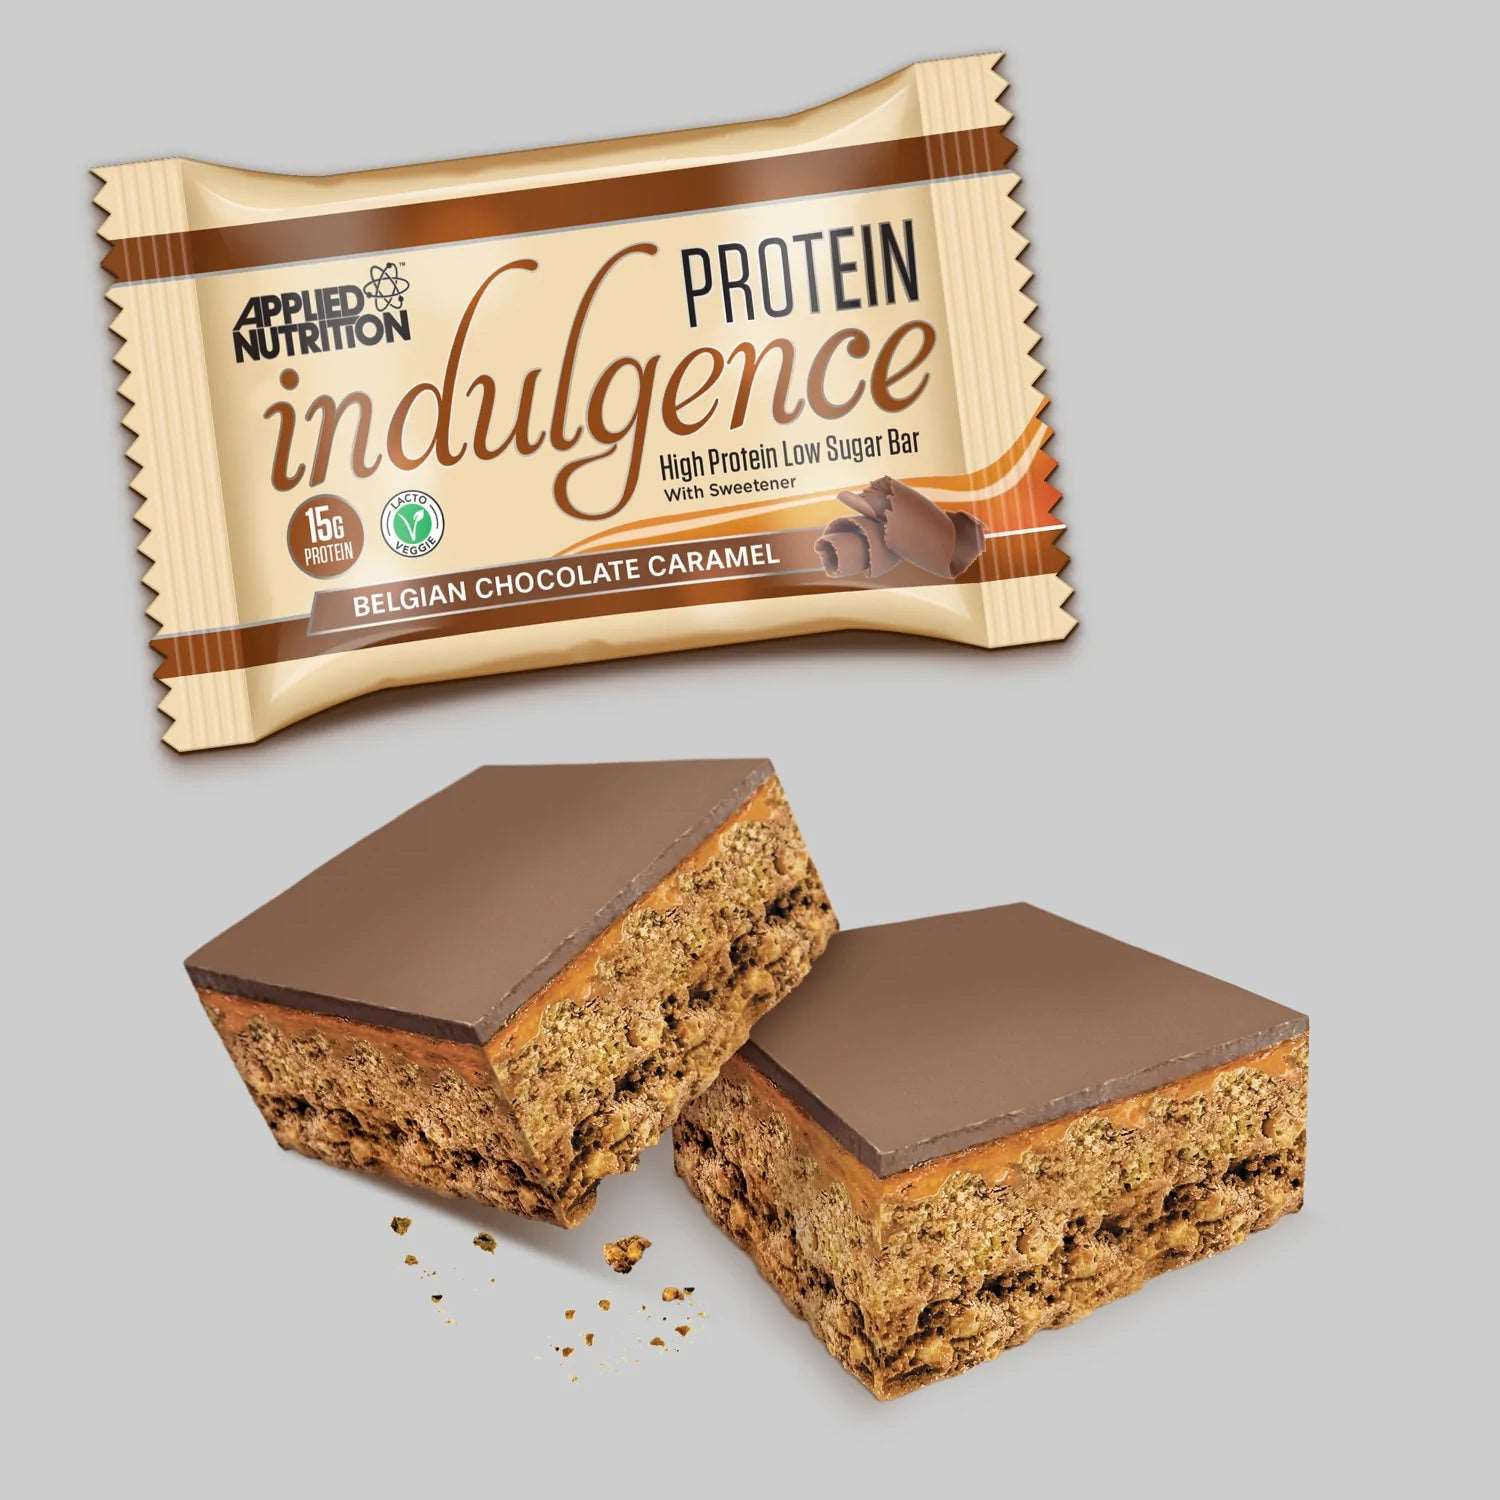 Applied Nutrition Indulgence Protein Bar (1 bar) applied-nutrition-indulgence-protein-bar-1-bar Protein Snacks Belgian Chocolate Caramel BEST BY Sept 25, 2023 Applied Nutrition